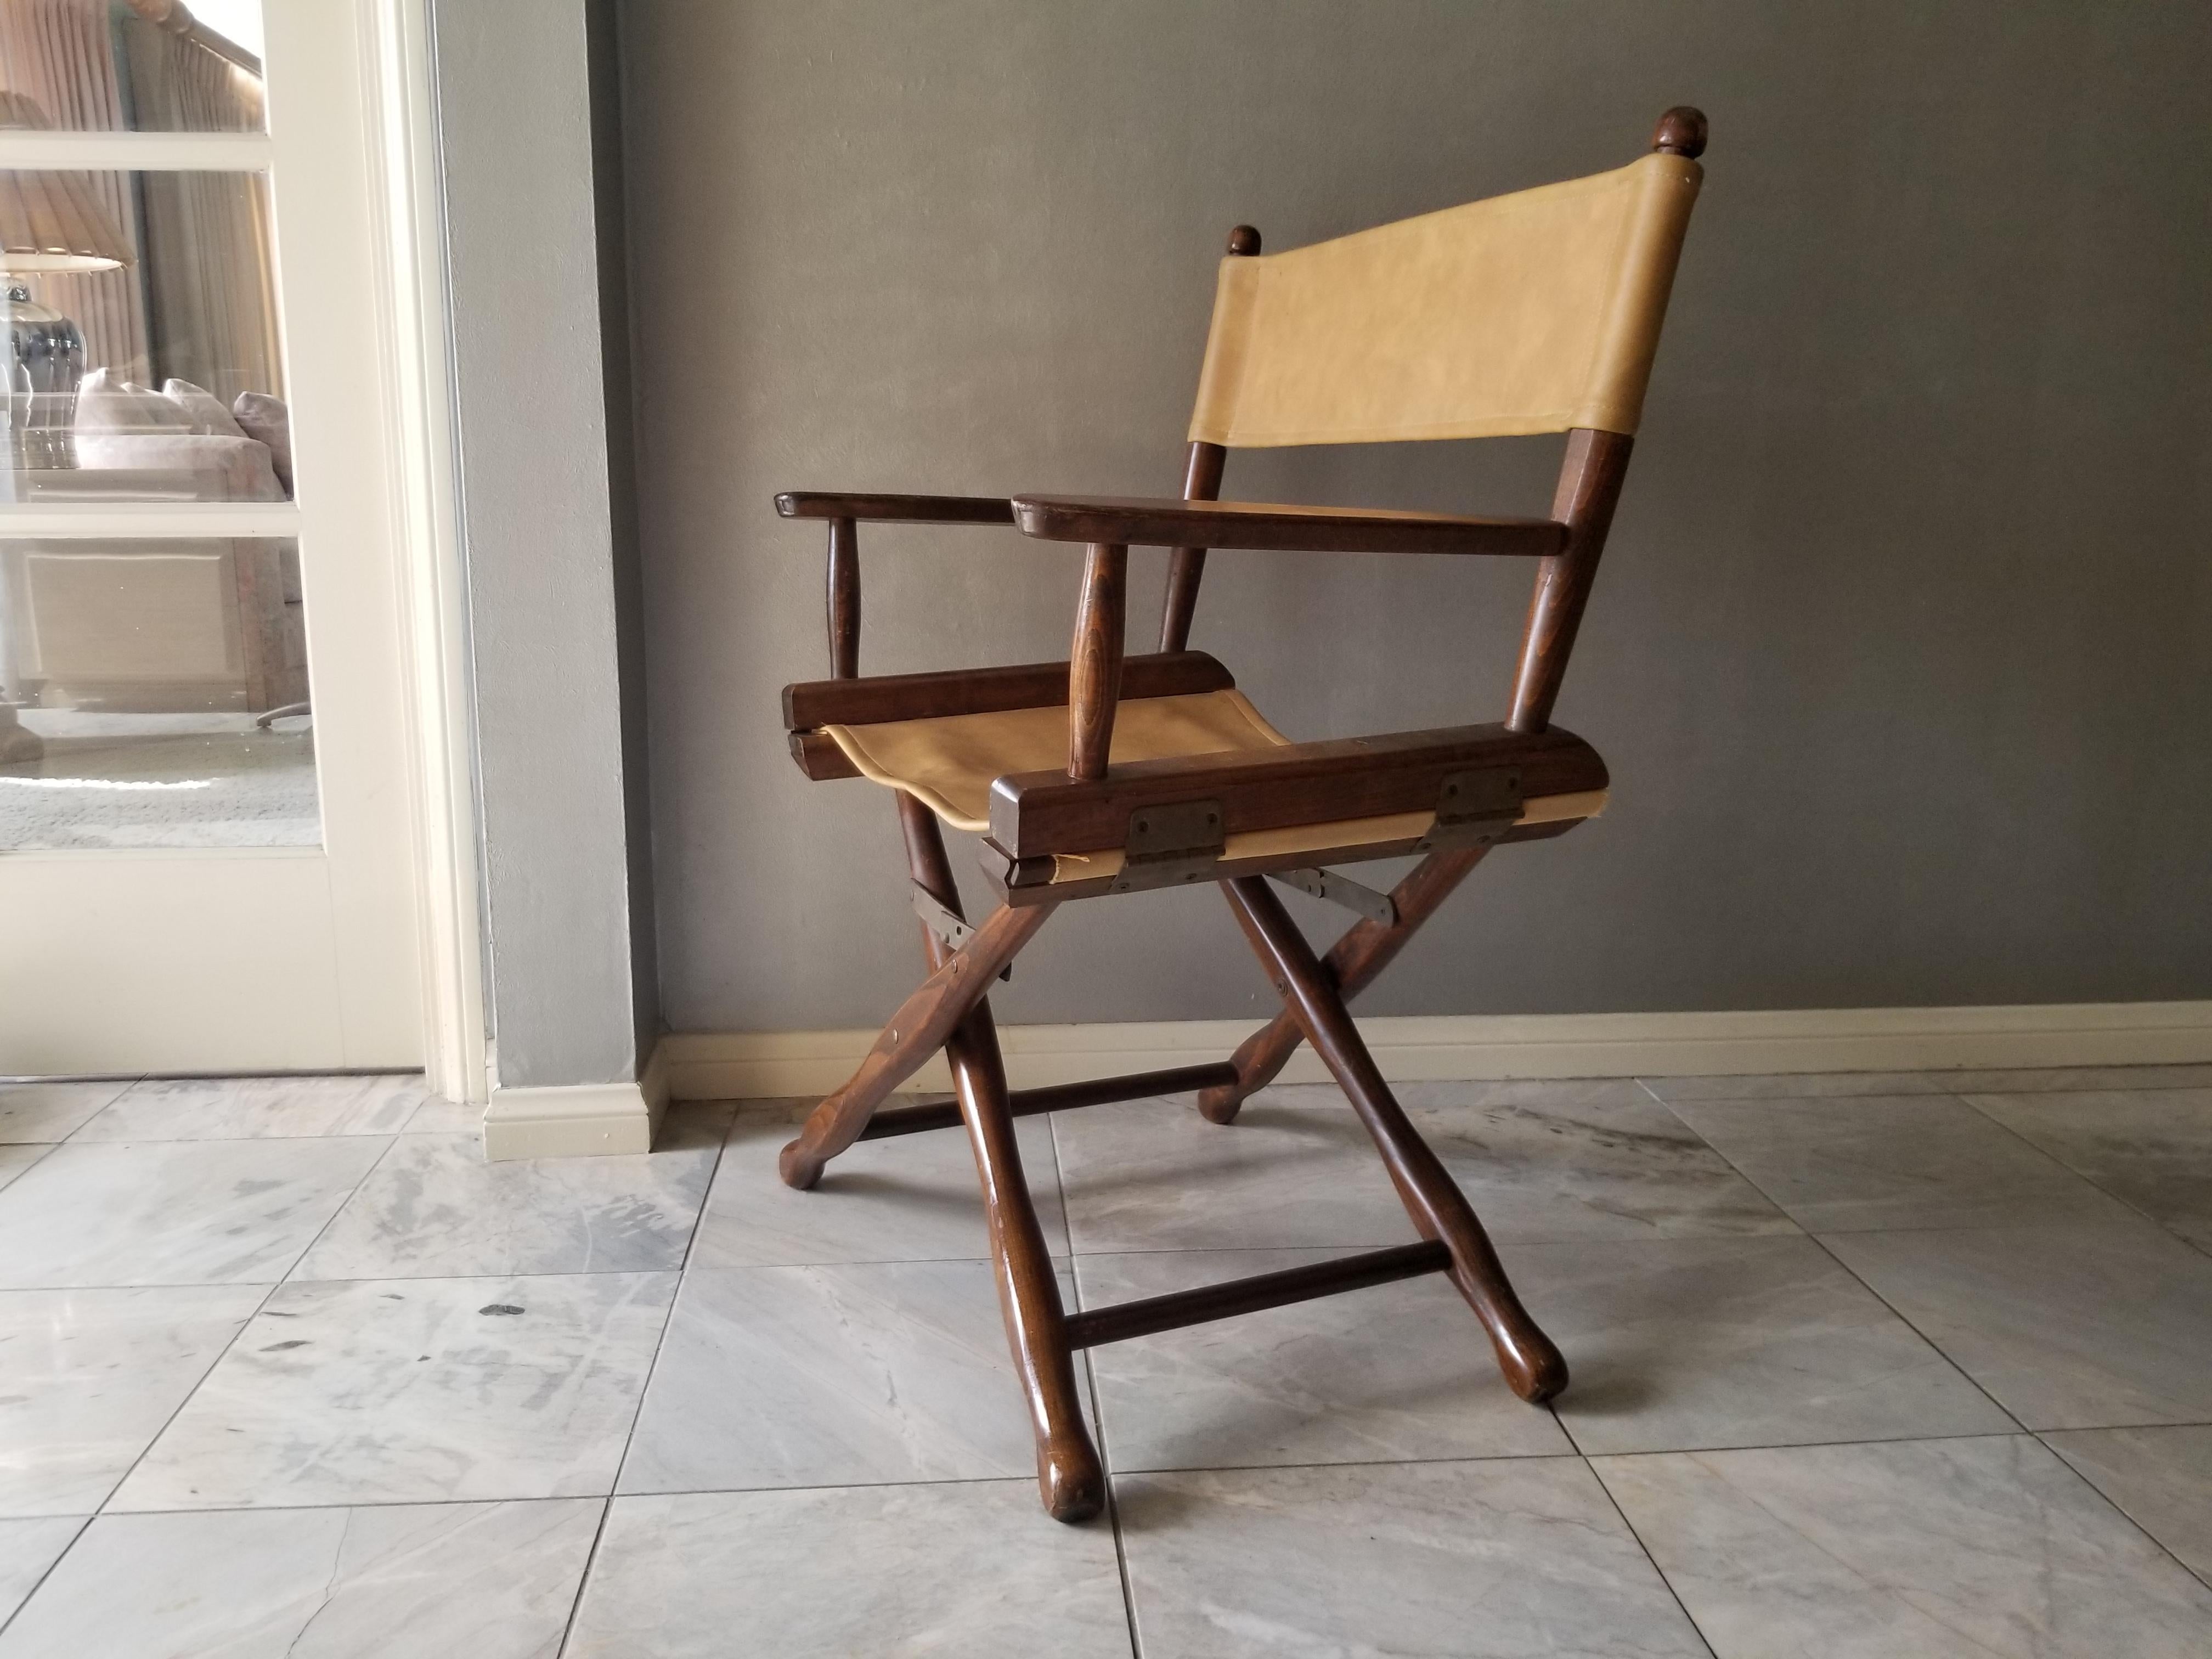 Director's Chair
1960s DIRECTORS Chair by Gold Medal Folding Furniture Company Racine WI
Gold Medal Camp Furniture
Original maker's metal tag retained.
Walnut Frame -Contoured Legs- Brass Hardware - Compact and Lightweight
Director- Safari Style